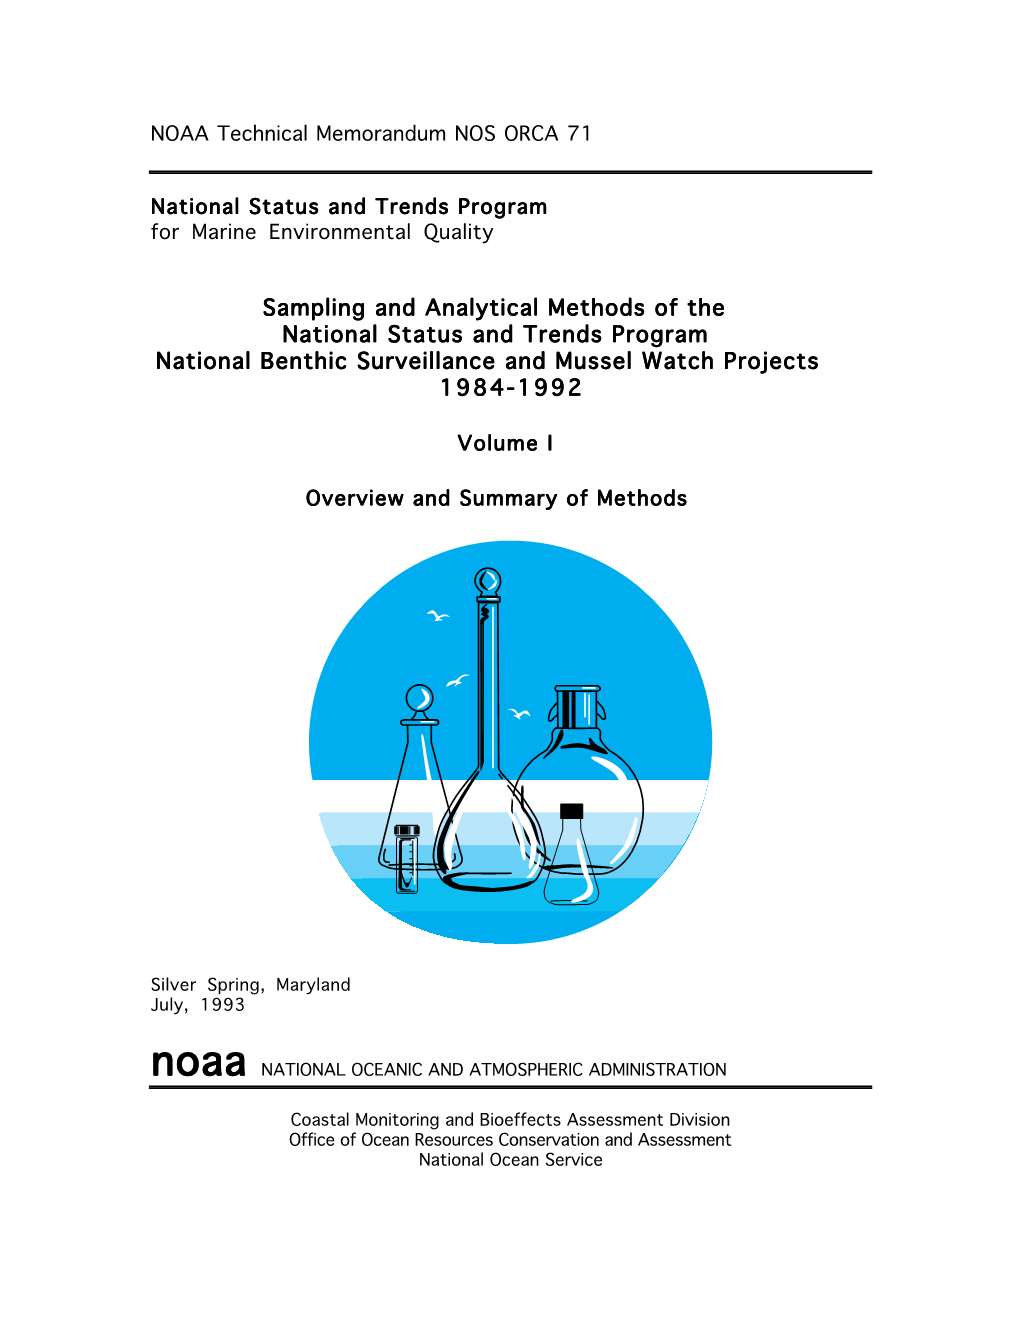 Sampling and Analytical Methods of the National Status and Trends Program National Benthic Surveillance and Mussel Watch Projects 1984-1992